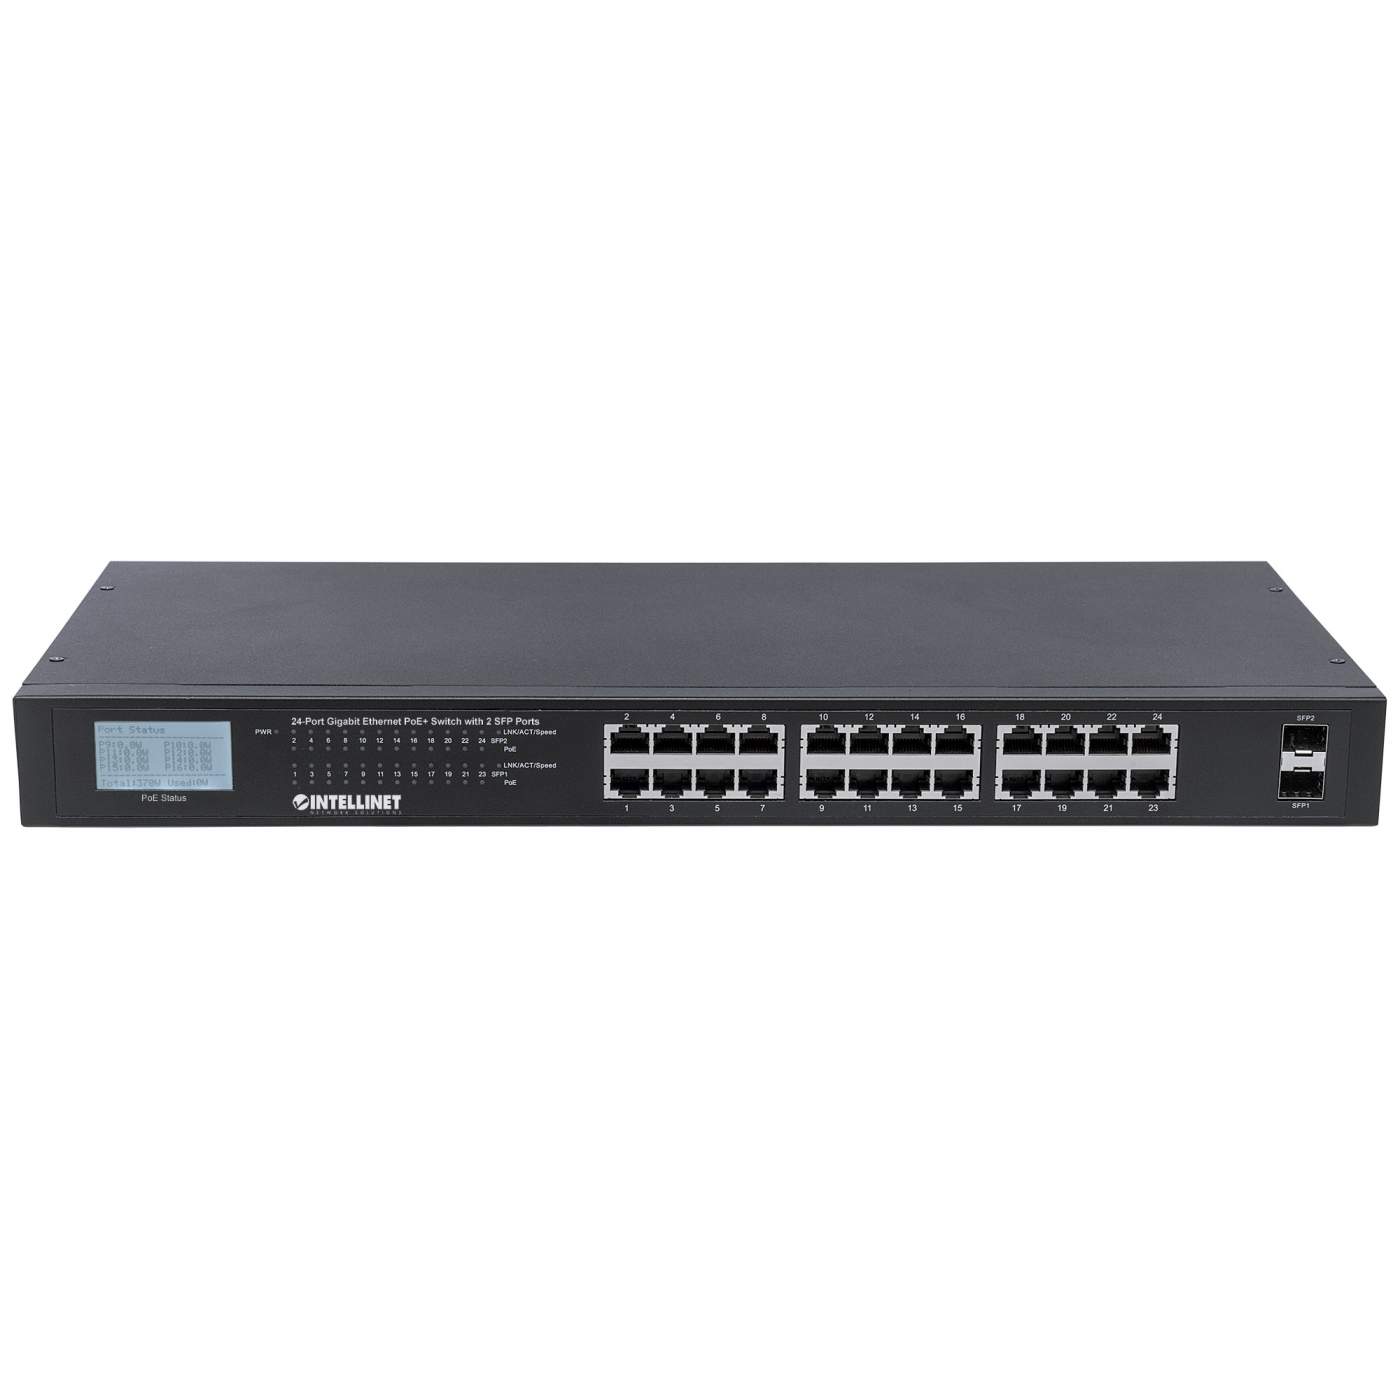 24-Port Gigabit Ethernet PoE+ Switch with 2 SFP Ports and LCD Screen  (Refurbushed)